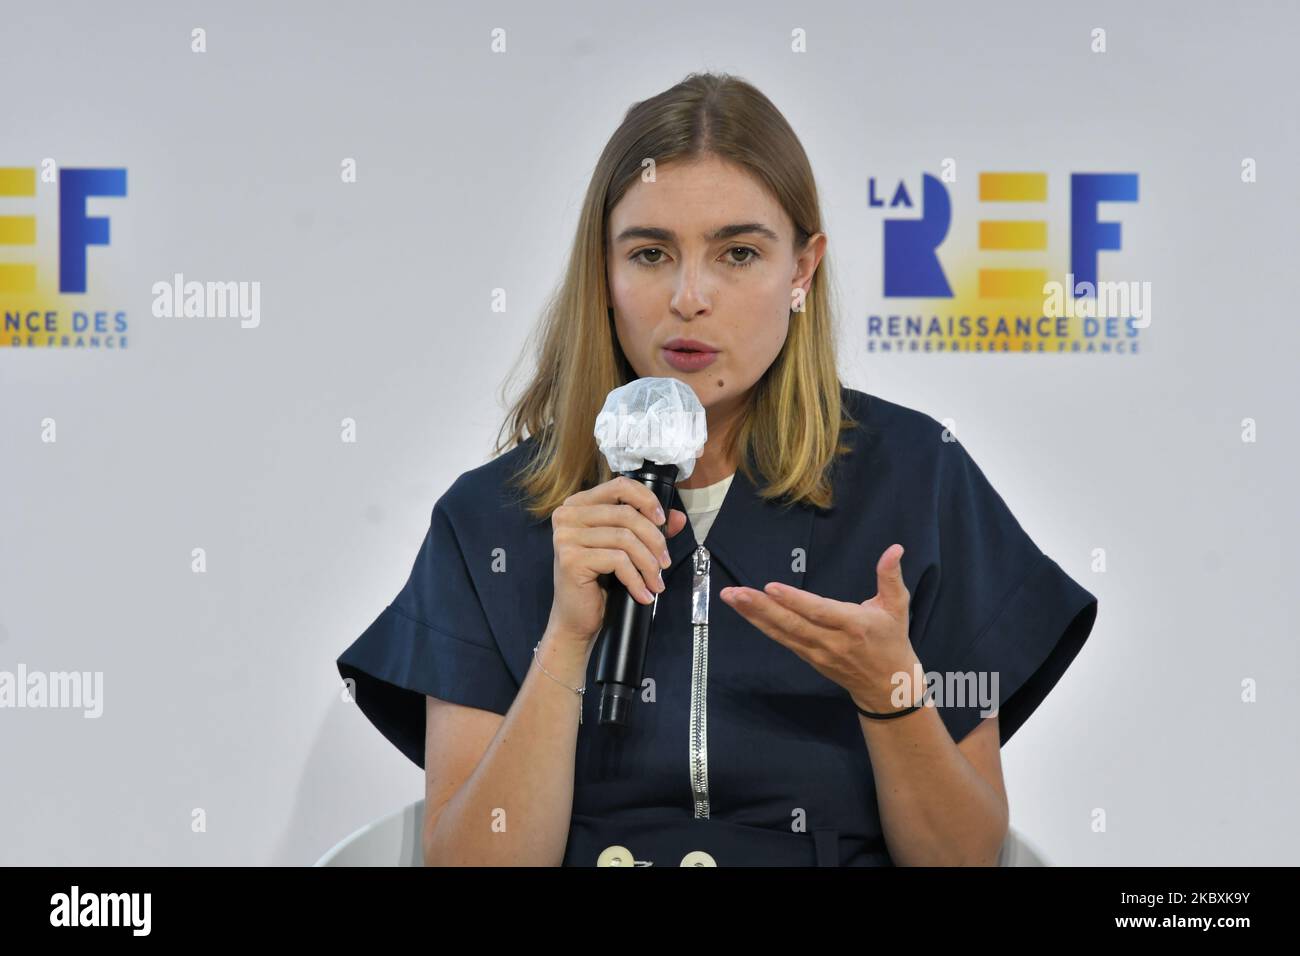 Fairly Made President Camille Le Gal attends at the meeting of French employers' association Medef themed 'The Renaissance of French Companies' on August 26, 2020, in Paris, France. (Photo by Daniel Pier/NurPhoto) Stock Photo